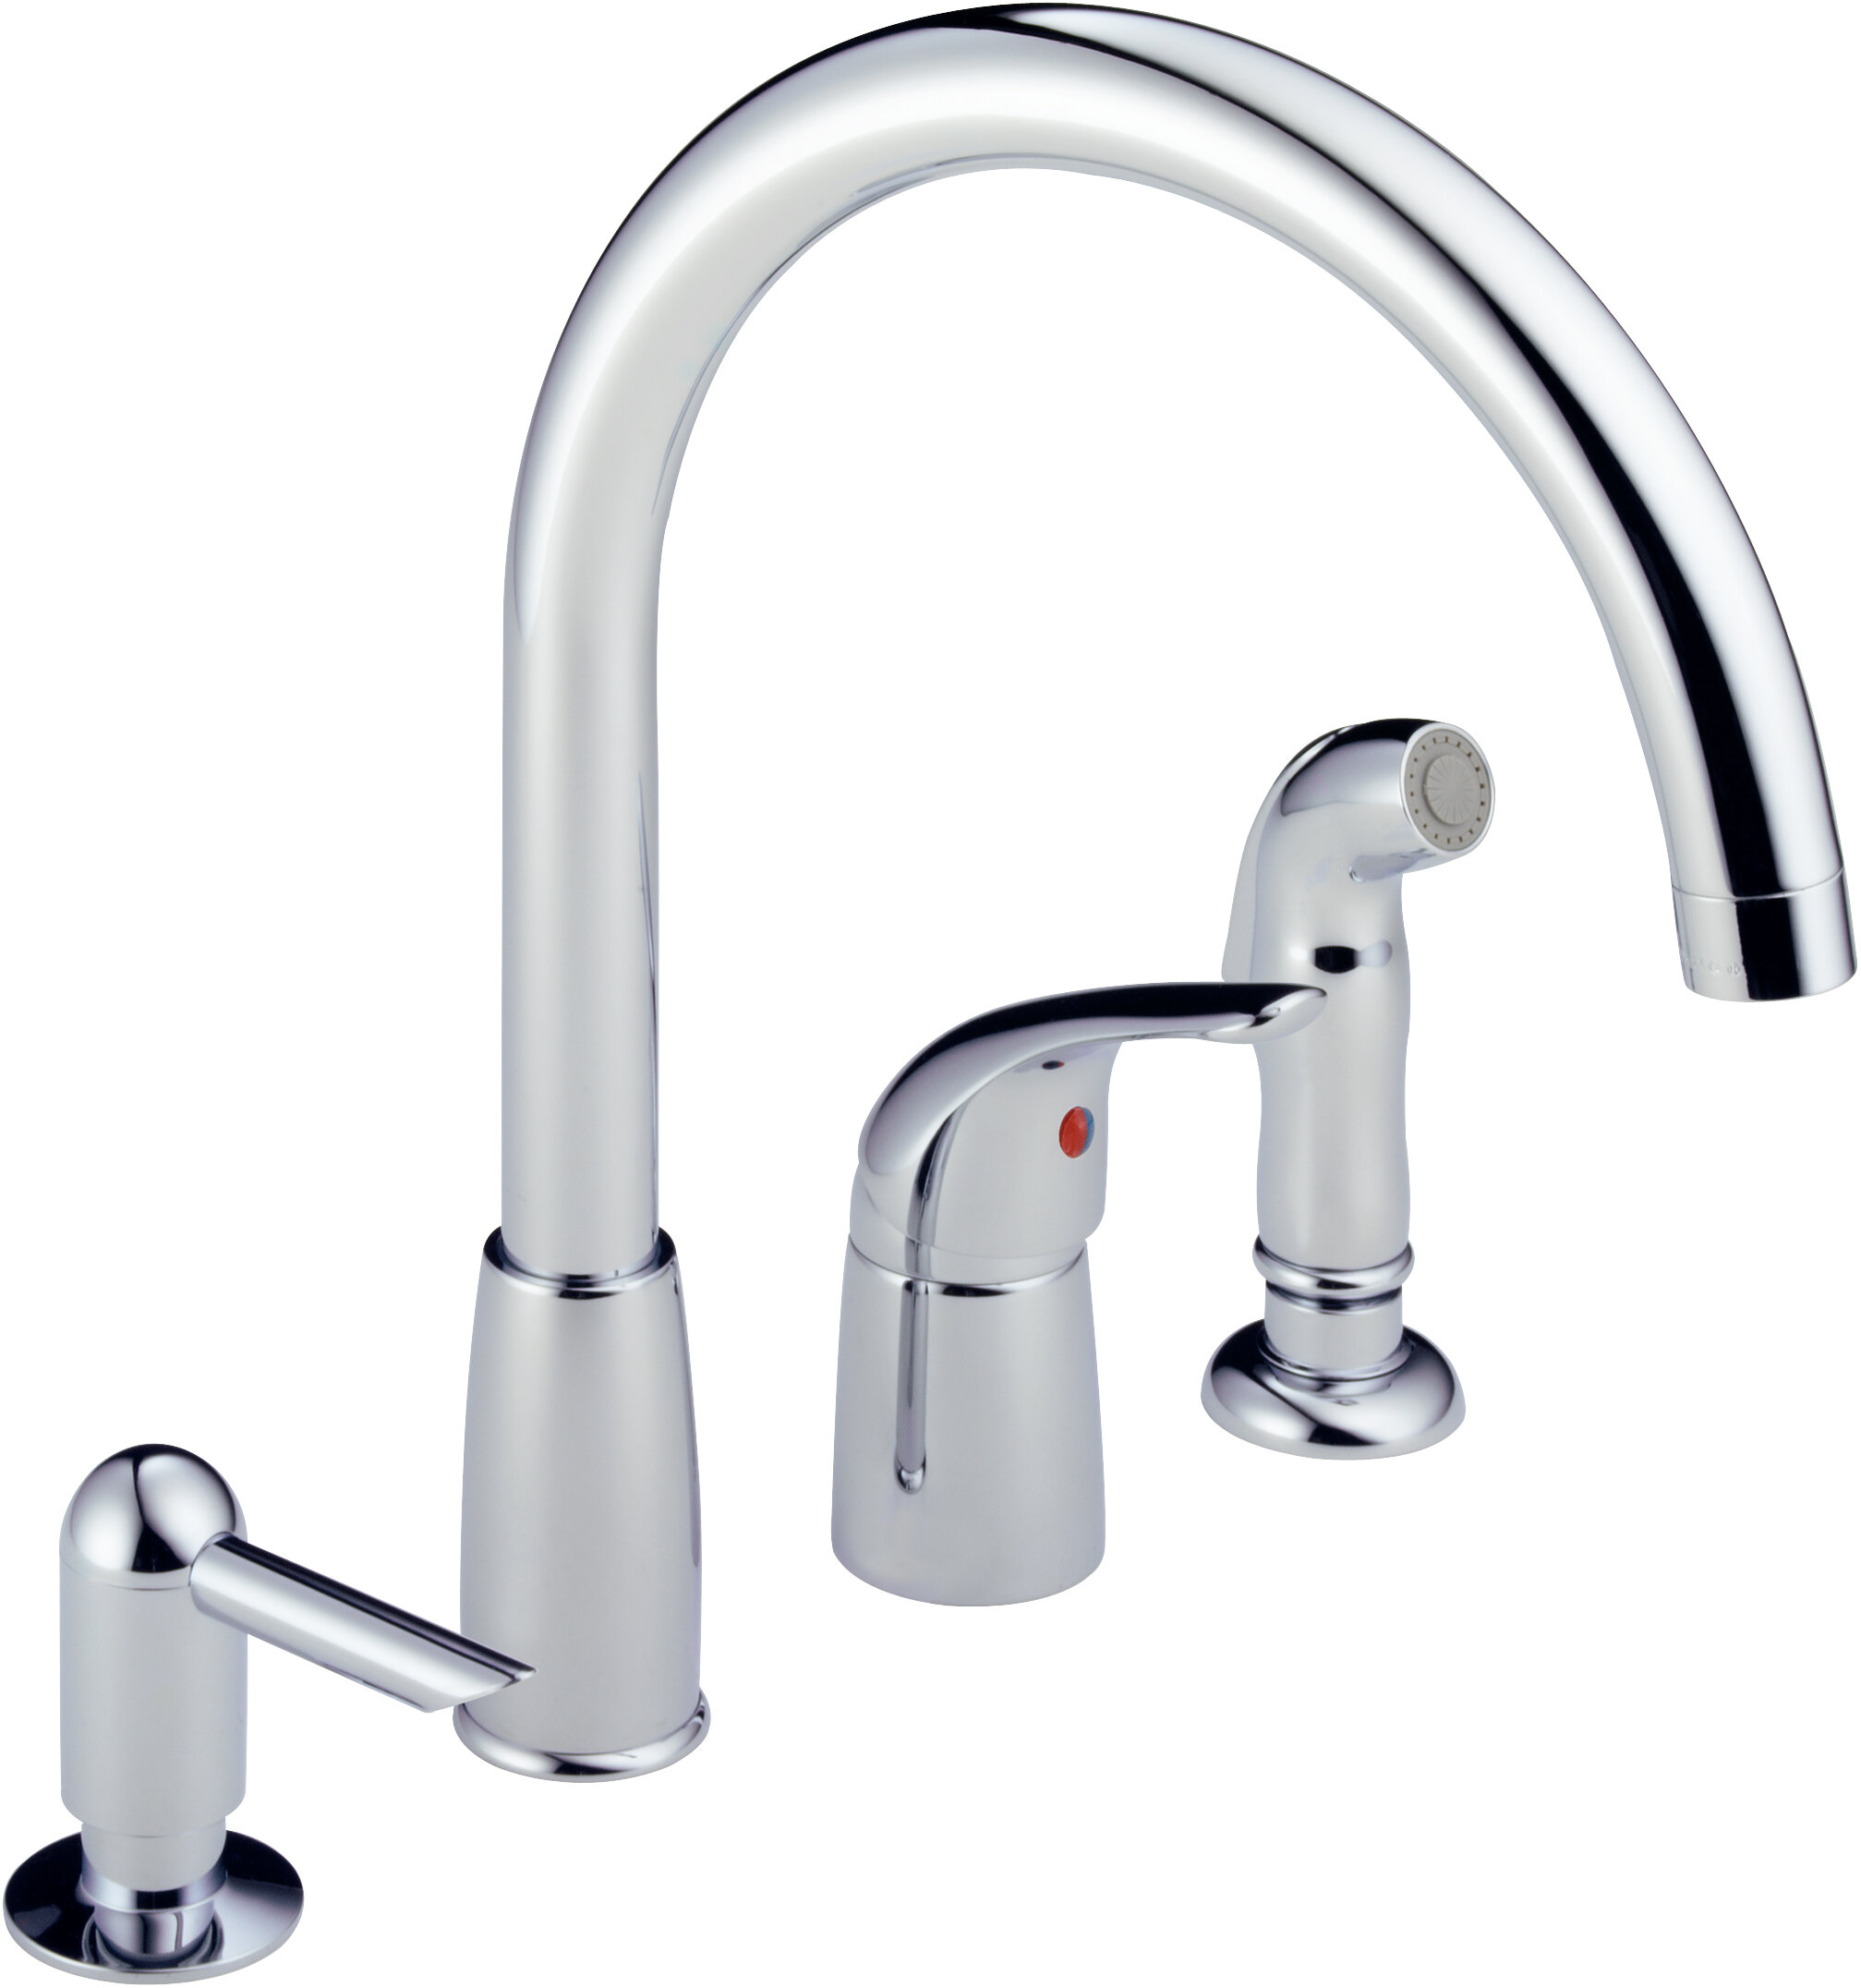 Peerless Faucets Single Handle Kitchen Faucet With Soap Dispenser